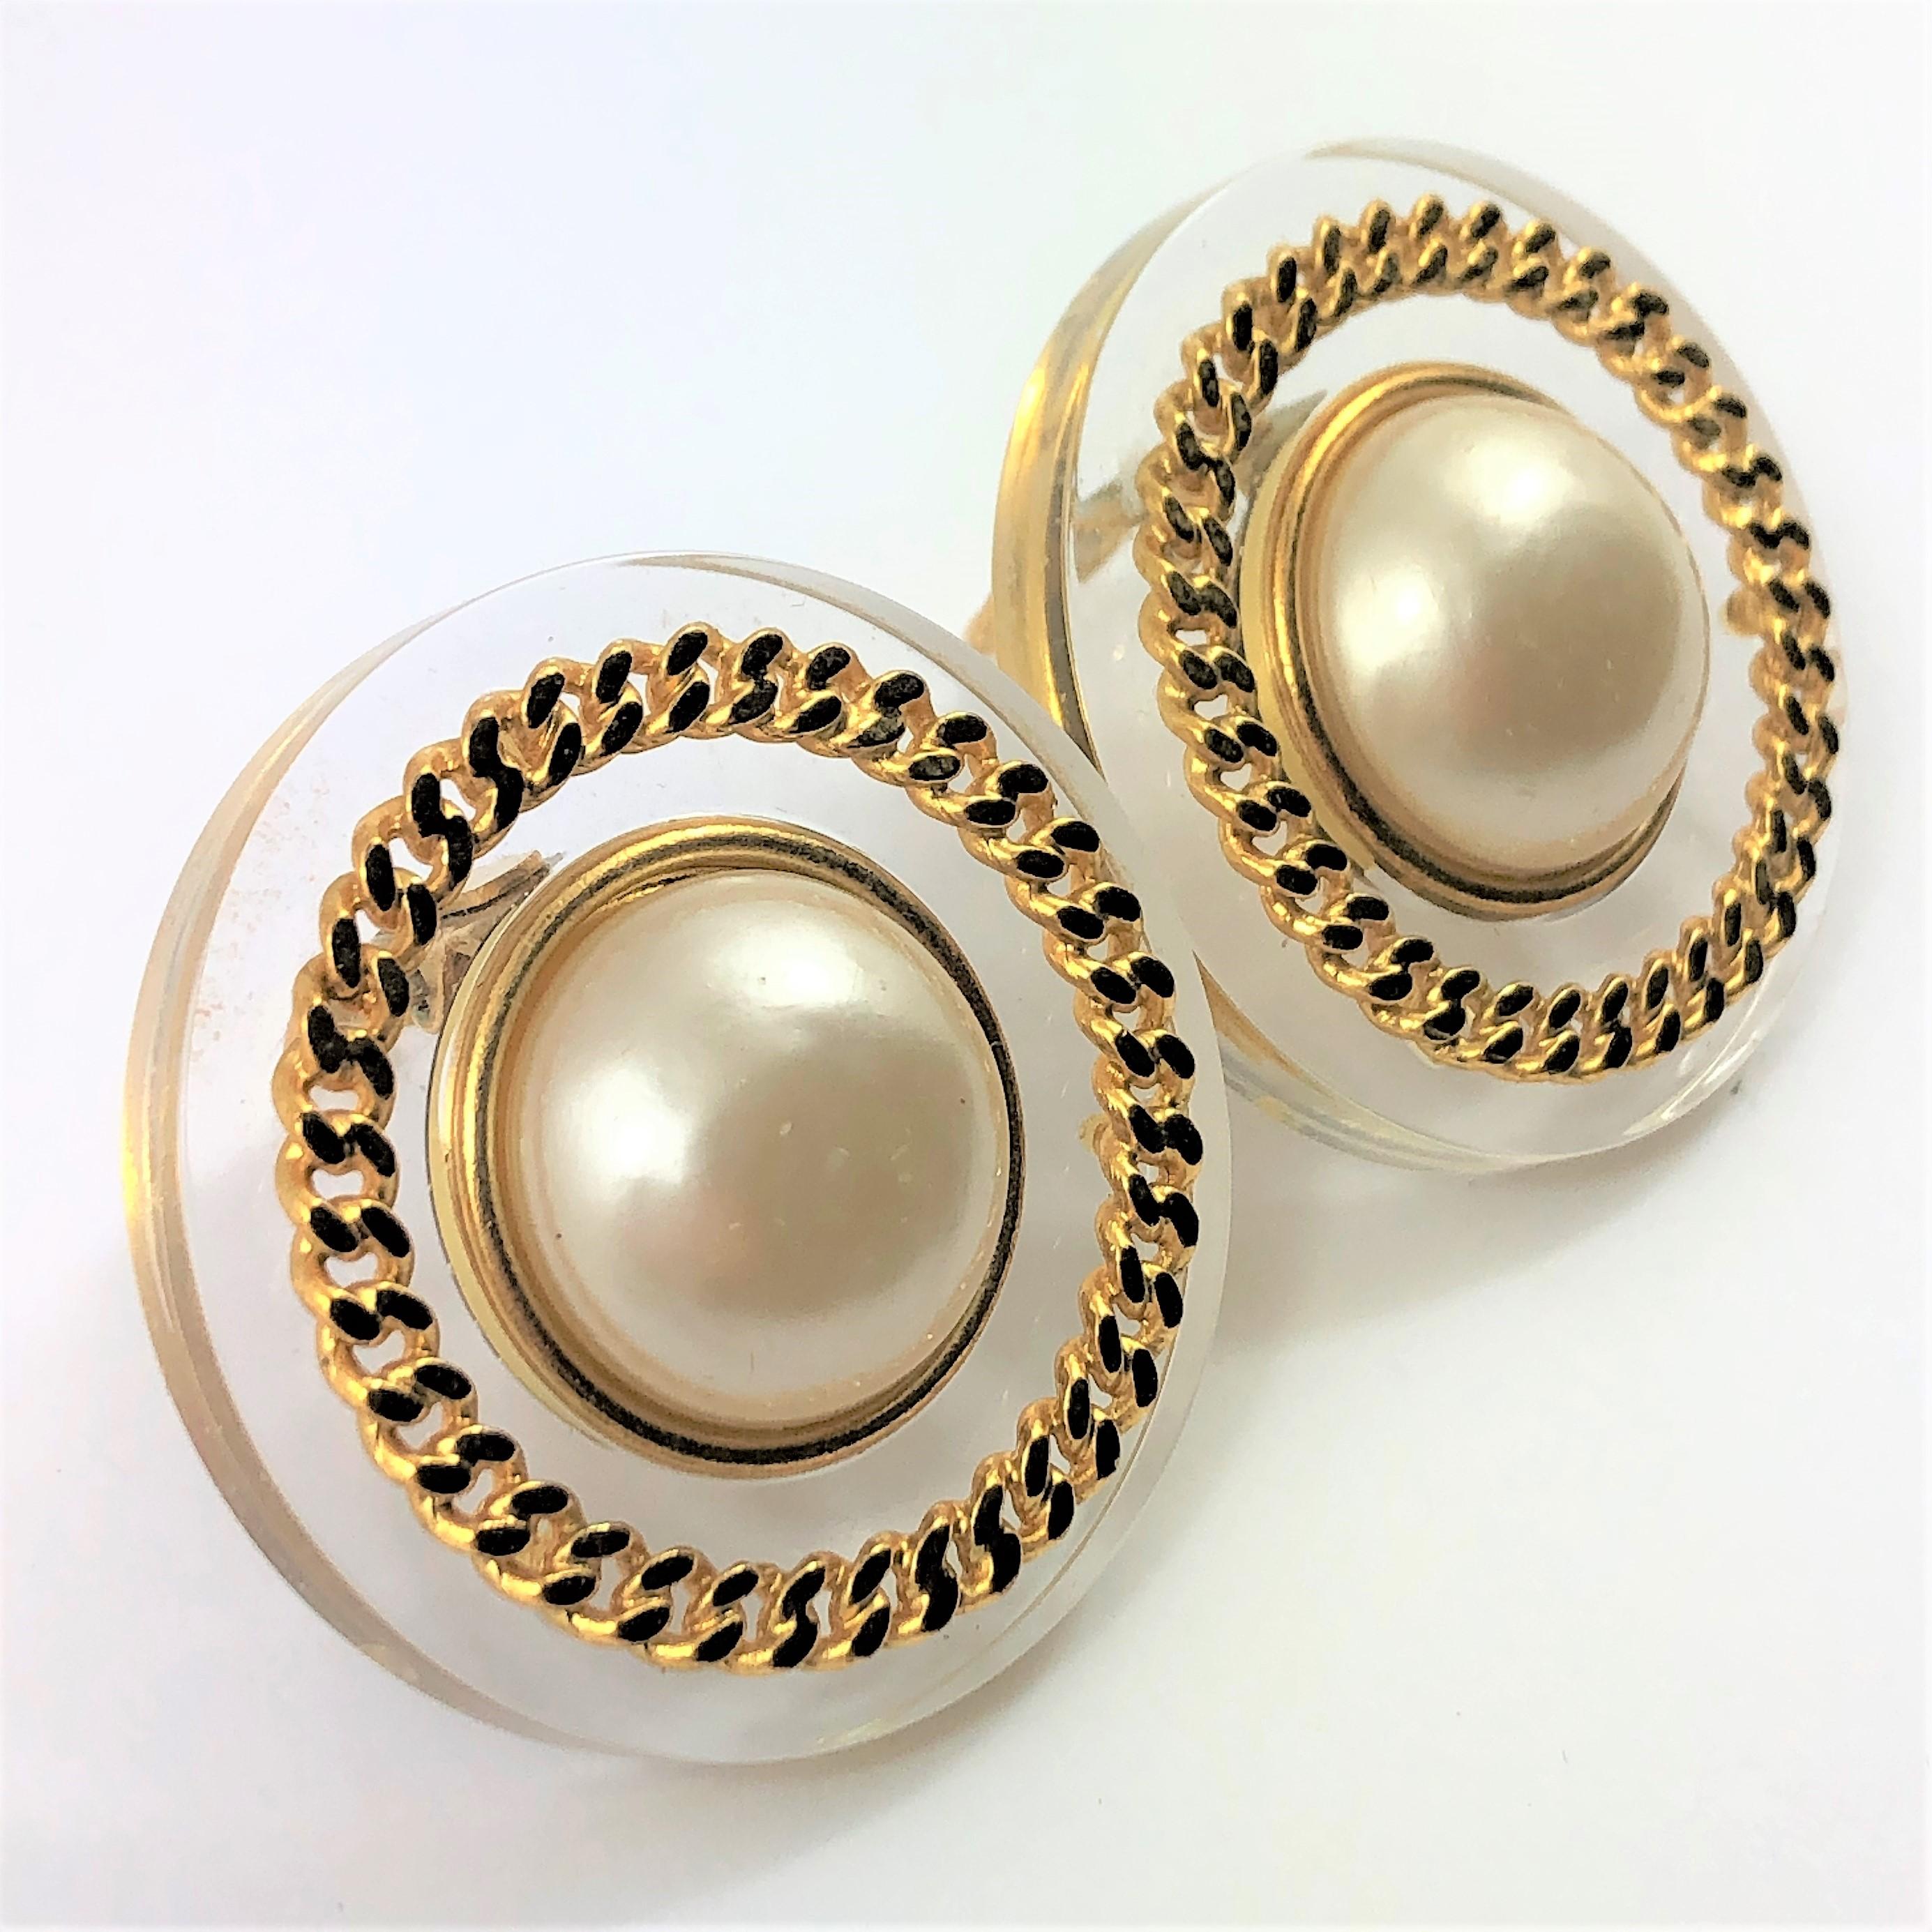 Measuring 1 5/8 inch across, these jumbo size Chanel earrings are fabulous for any season. The clear plexiglass, with the large faux pearls and gold tone chain accents are as stylish
today as they were when they were manufactured as part of Chanel's